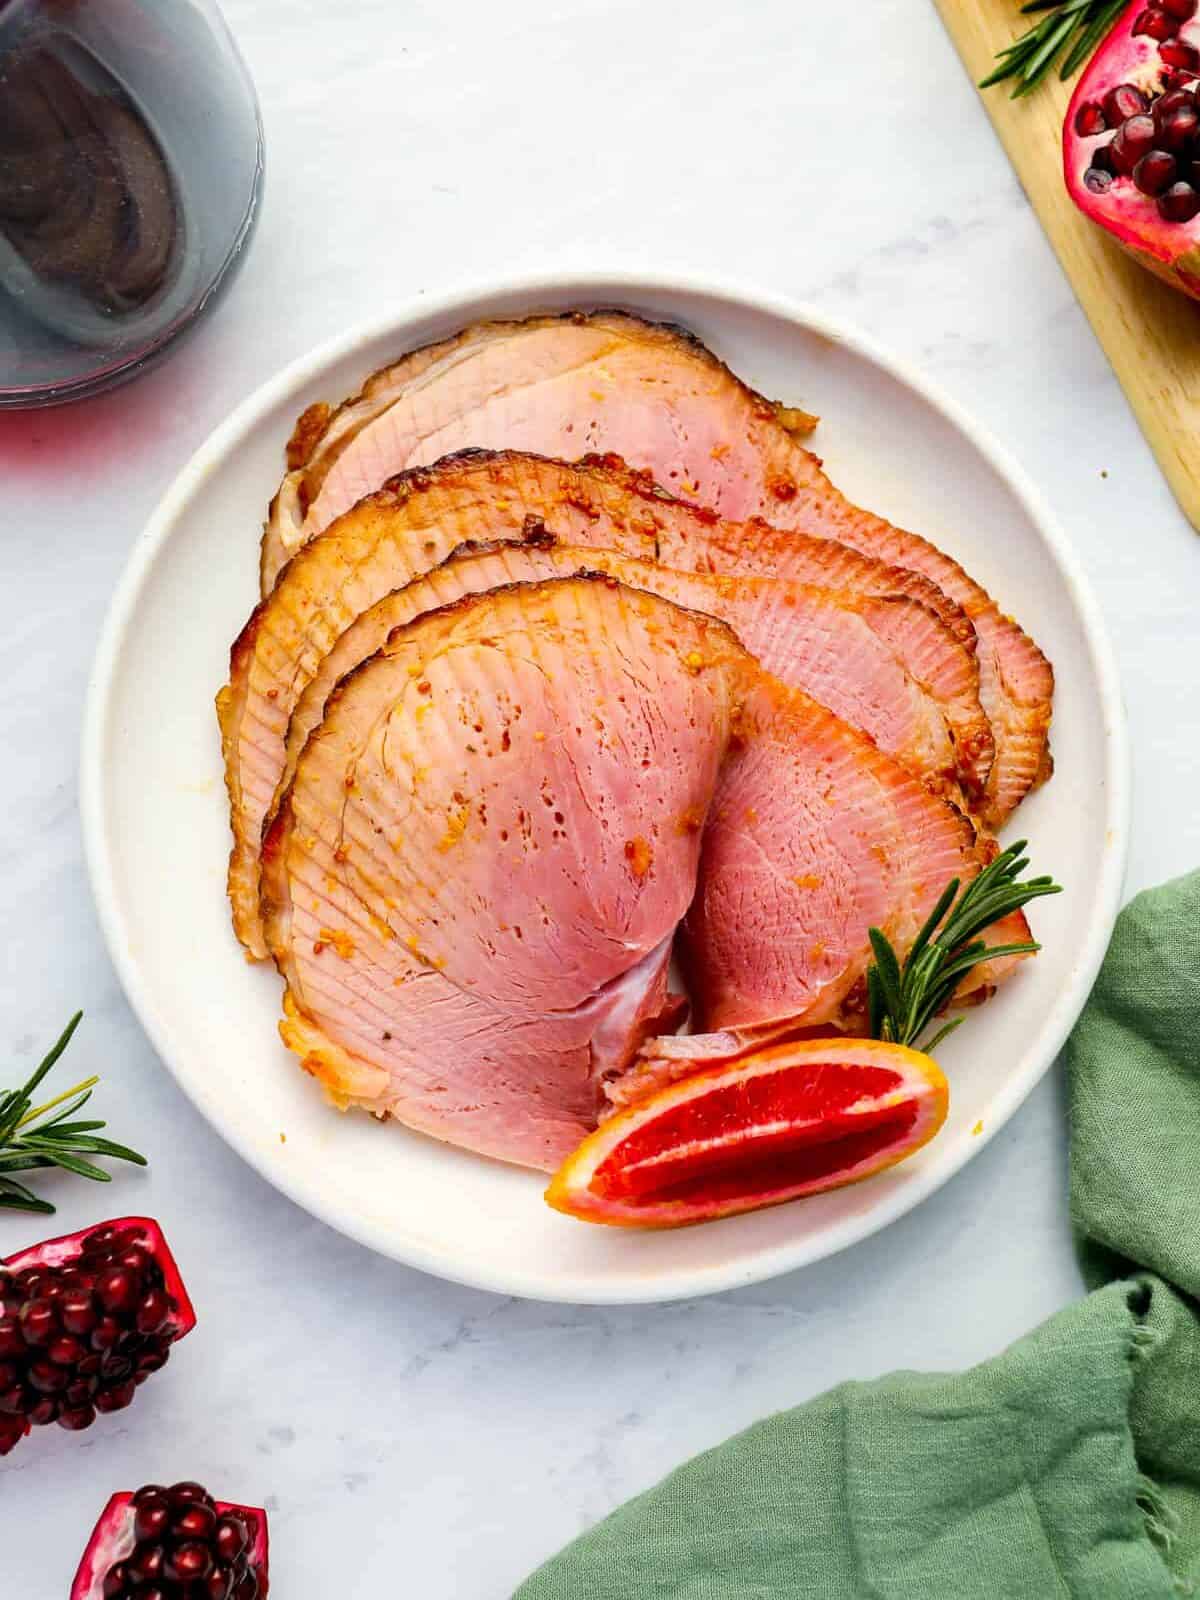 slices of glazed Christmas ham on a plate.